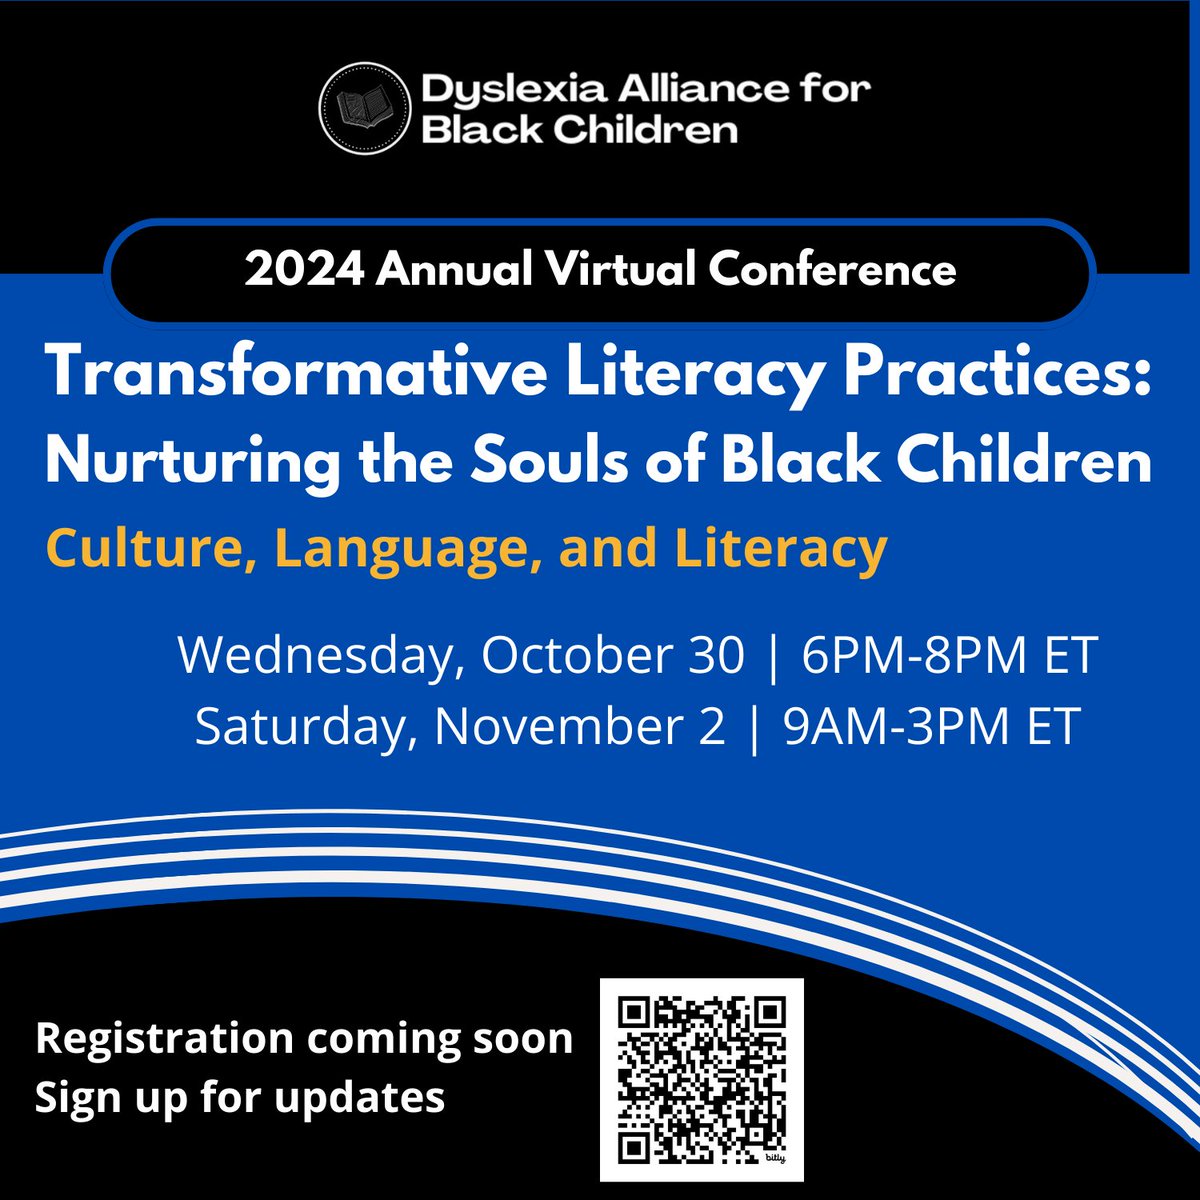 We are thrilled to announce the dates for our upcoming 2nd Annual DABC Conference! This event is designed to empower, educate, and elevate the conversation around literacy, dyslexia, and the unique strengths of Black learners. Stay tuned for more updates: l8r.it/hsXH